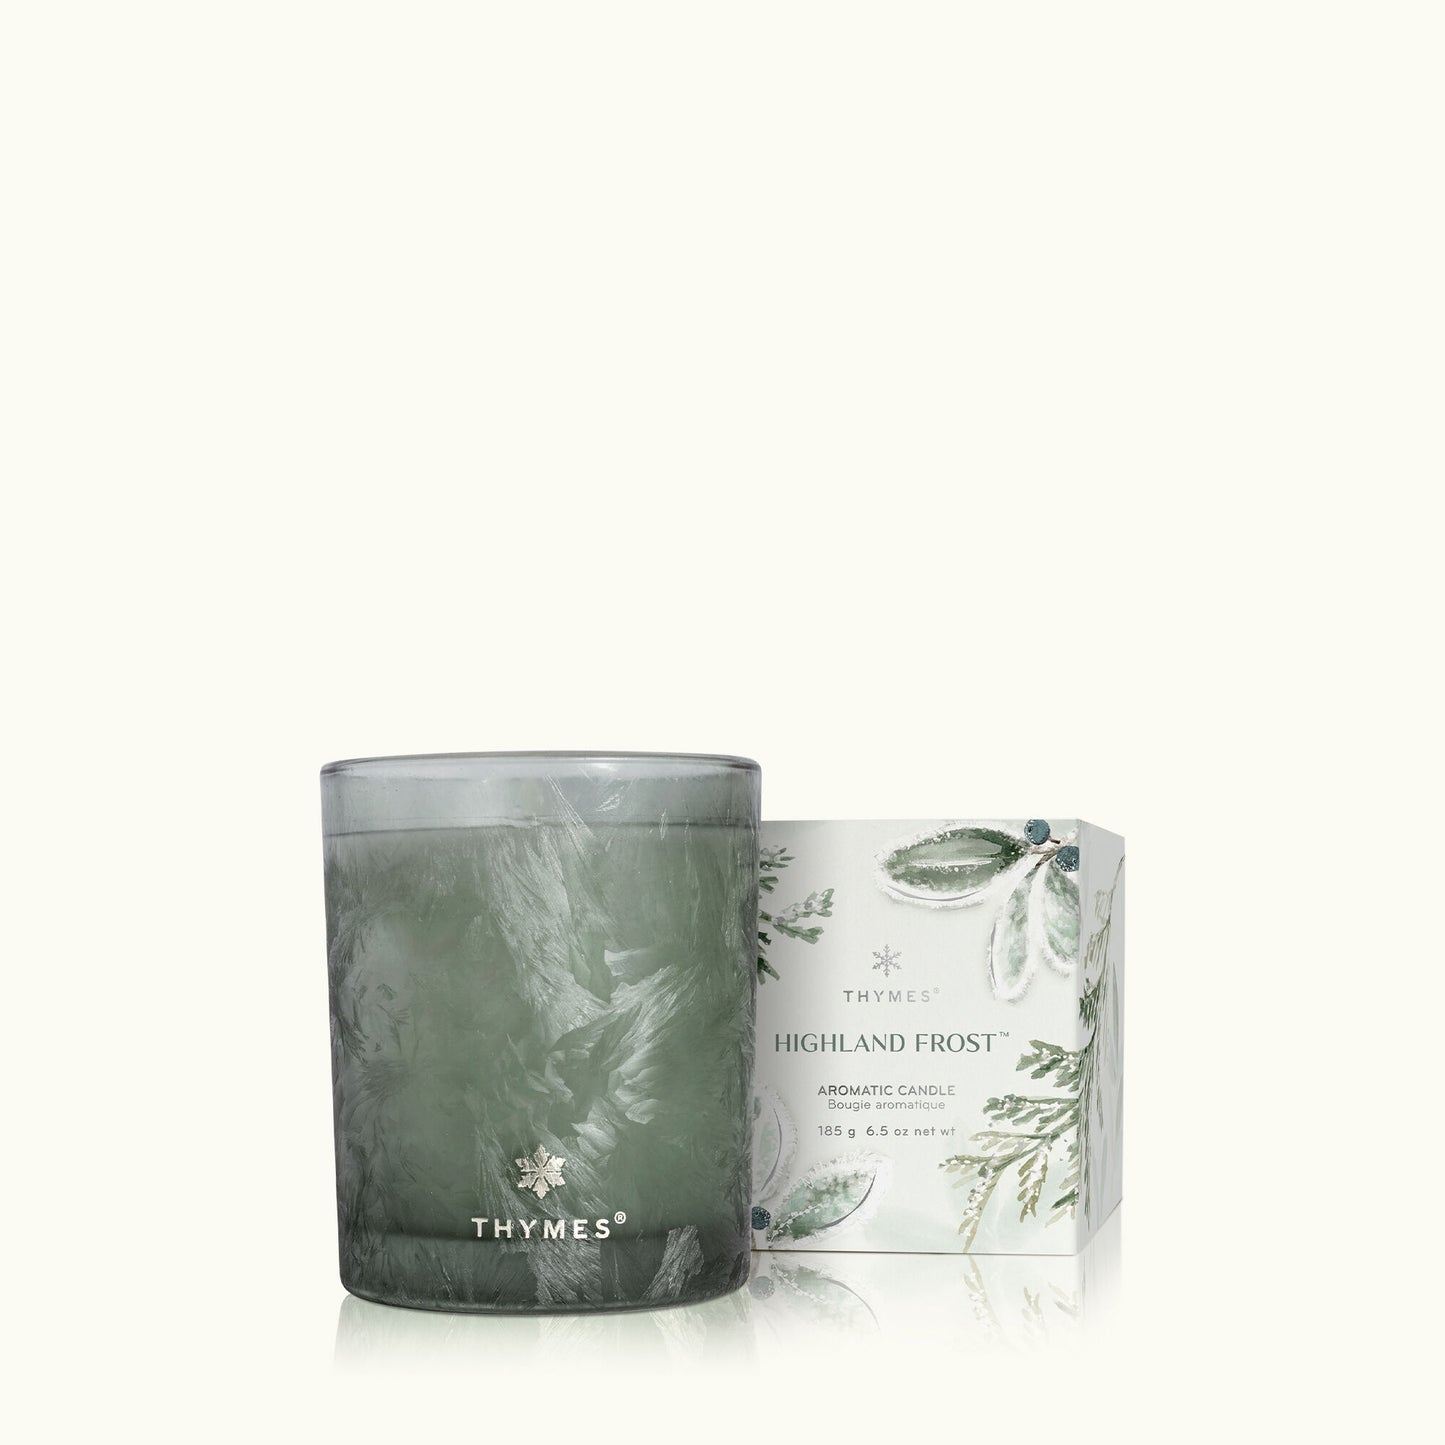 Thymes Highland Frost Boxed Candle, 6.5 oz